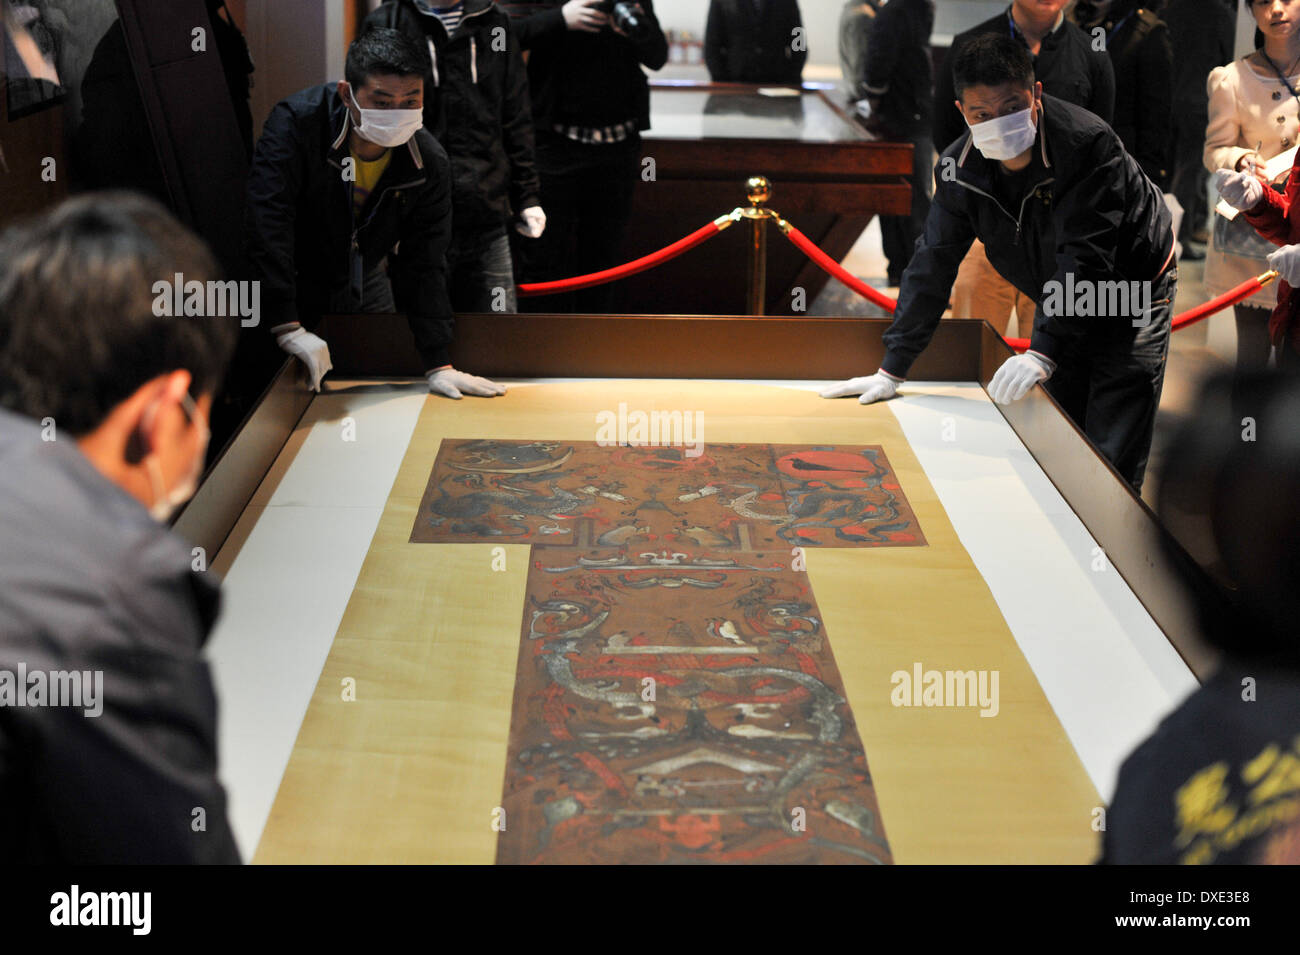 (140325) -- CHANGSHA, March 25, 2014 (Xinhua) -- Staff members arrange the T-shaped painting on silk, the highlight of the Hunan Provincial Museum, at the museum in Changsha, capital of central China's Hunan Province, March 25, 2014. More than 50 pieces (sets) of cultural relics from the Mawangdui Tombs of the Han Dynasty (206 B.C. - 220 A.D.), located in the eastern suburbs of Changsha, will be re-presented at the museum from March 29. The museum started its renovation in June 2012. (Xinhua/Bai Yu) (wyo) Stock Photo